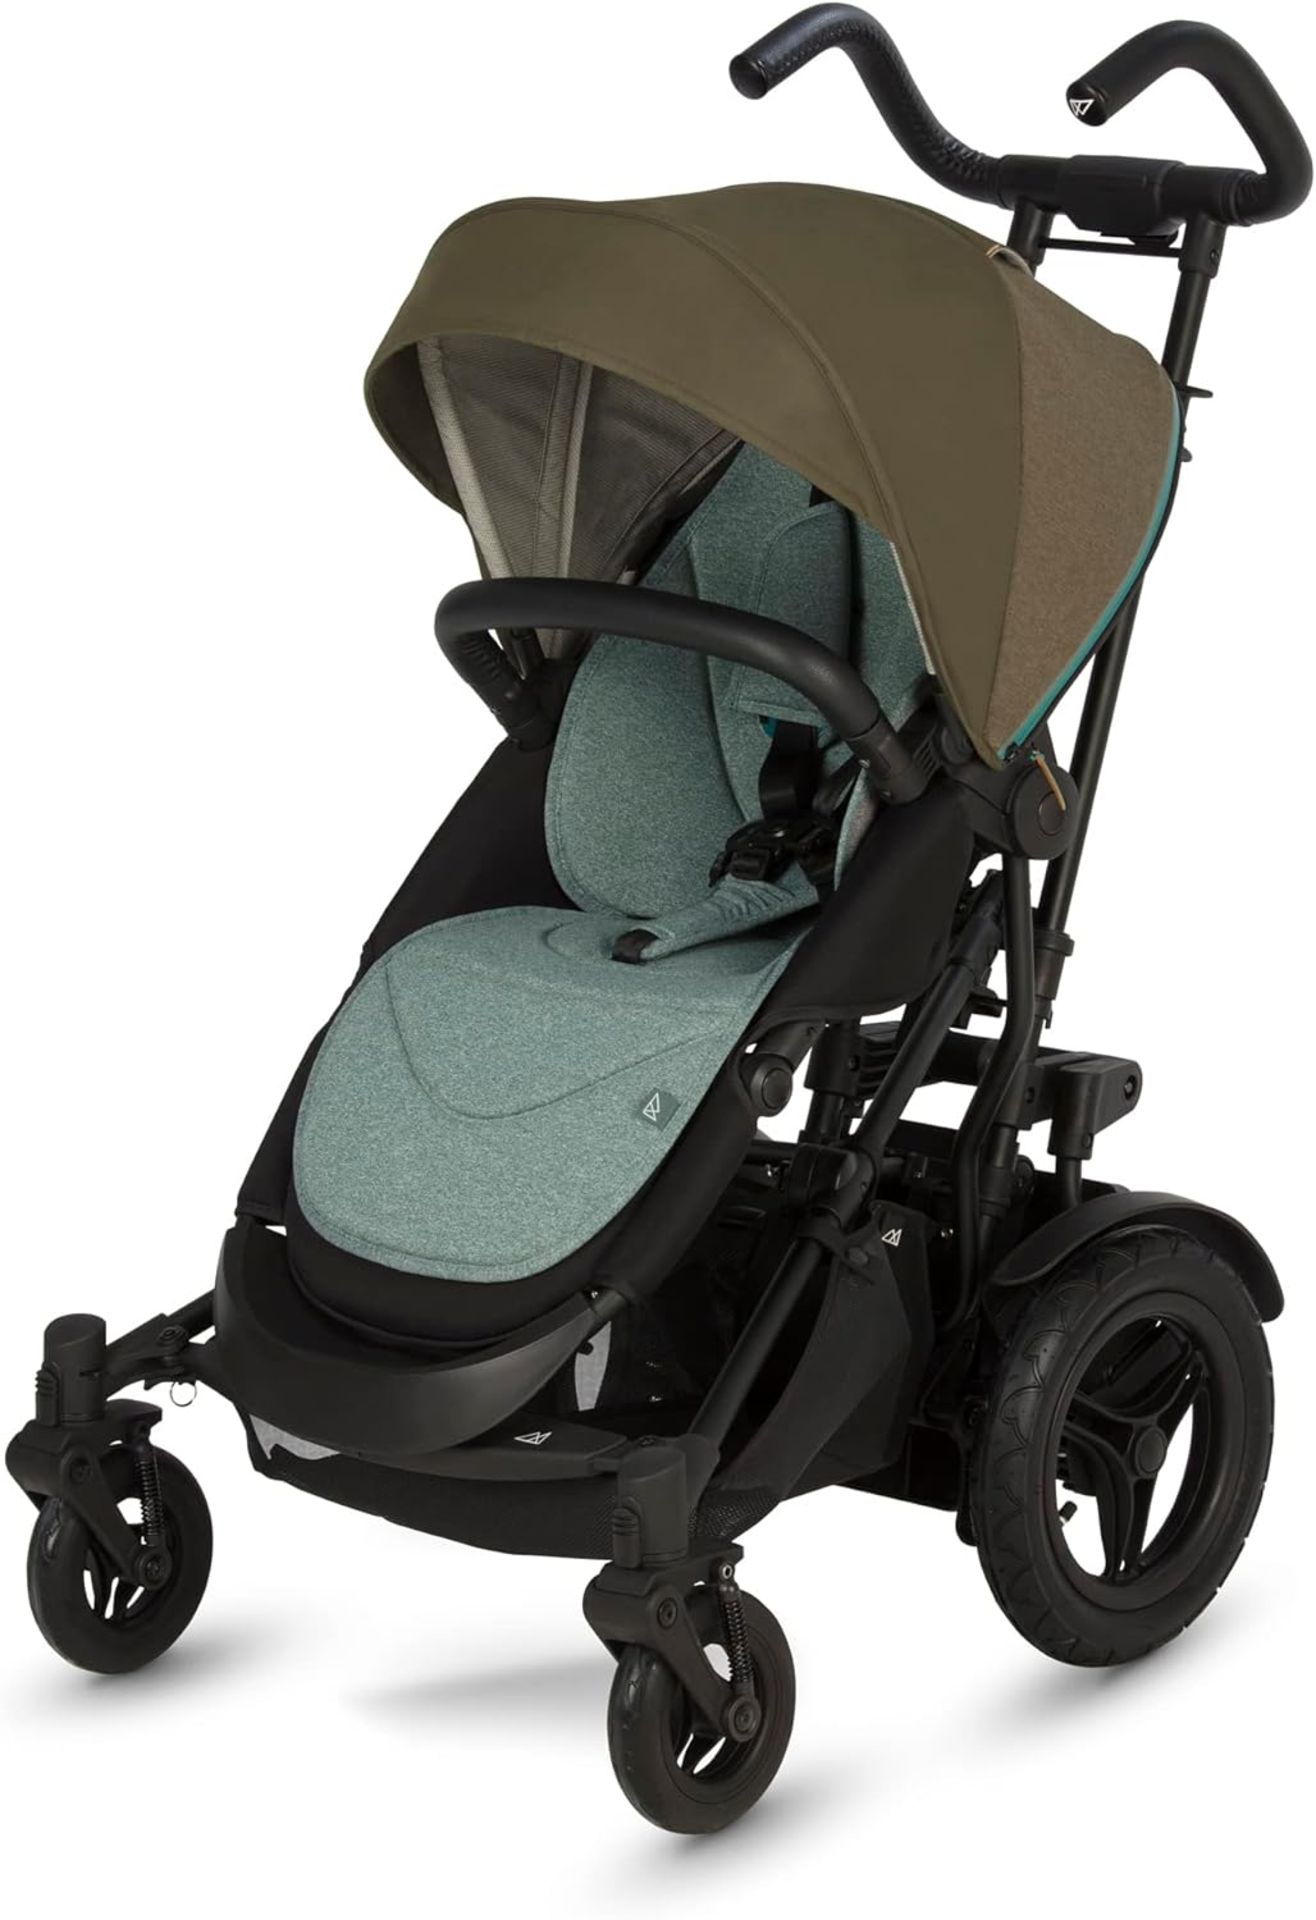 BRAND NEW MICRALITE TWO FOLD EVERGREEN FOLDING BABY PUSHCHAIR R19-5